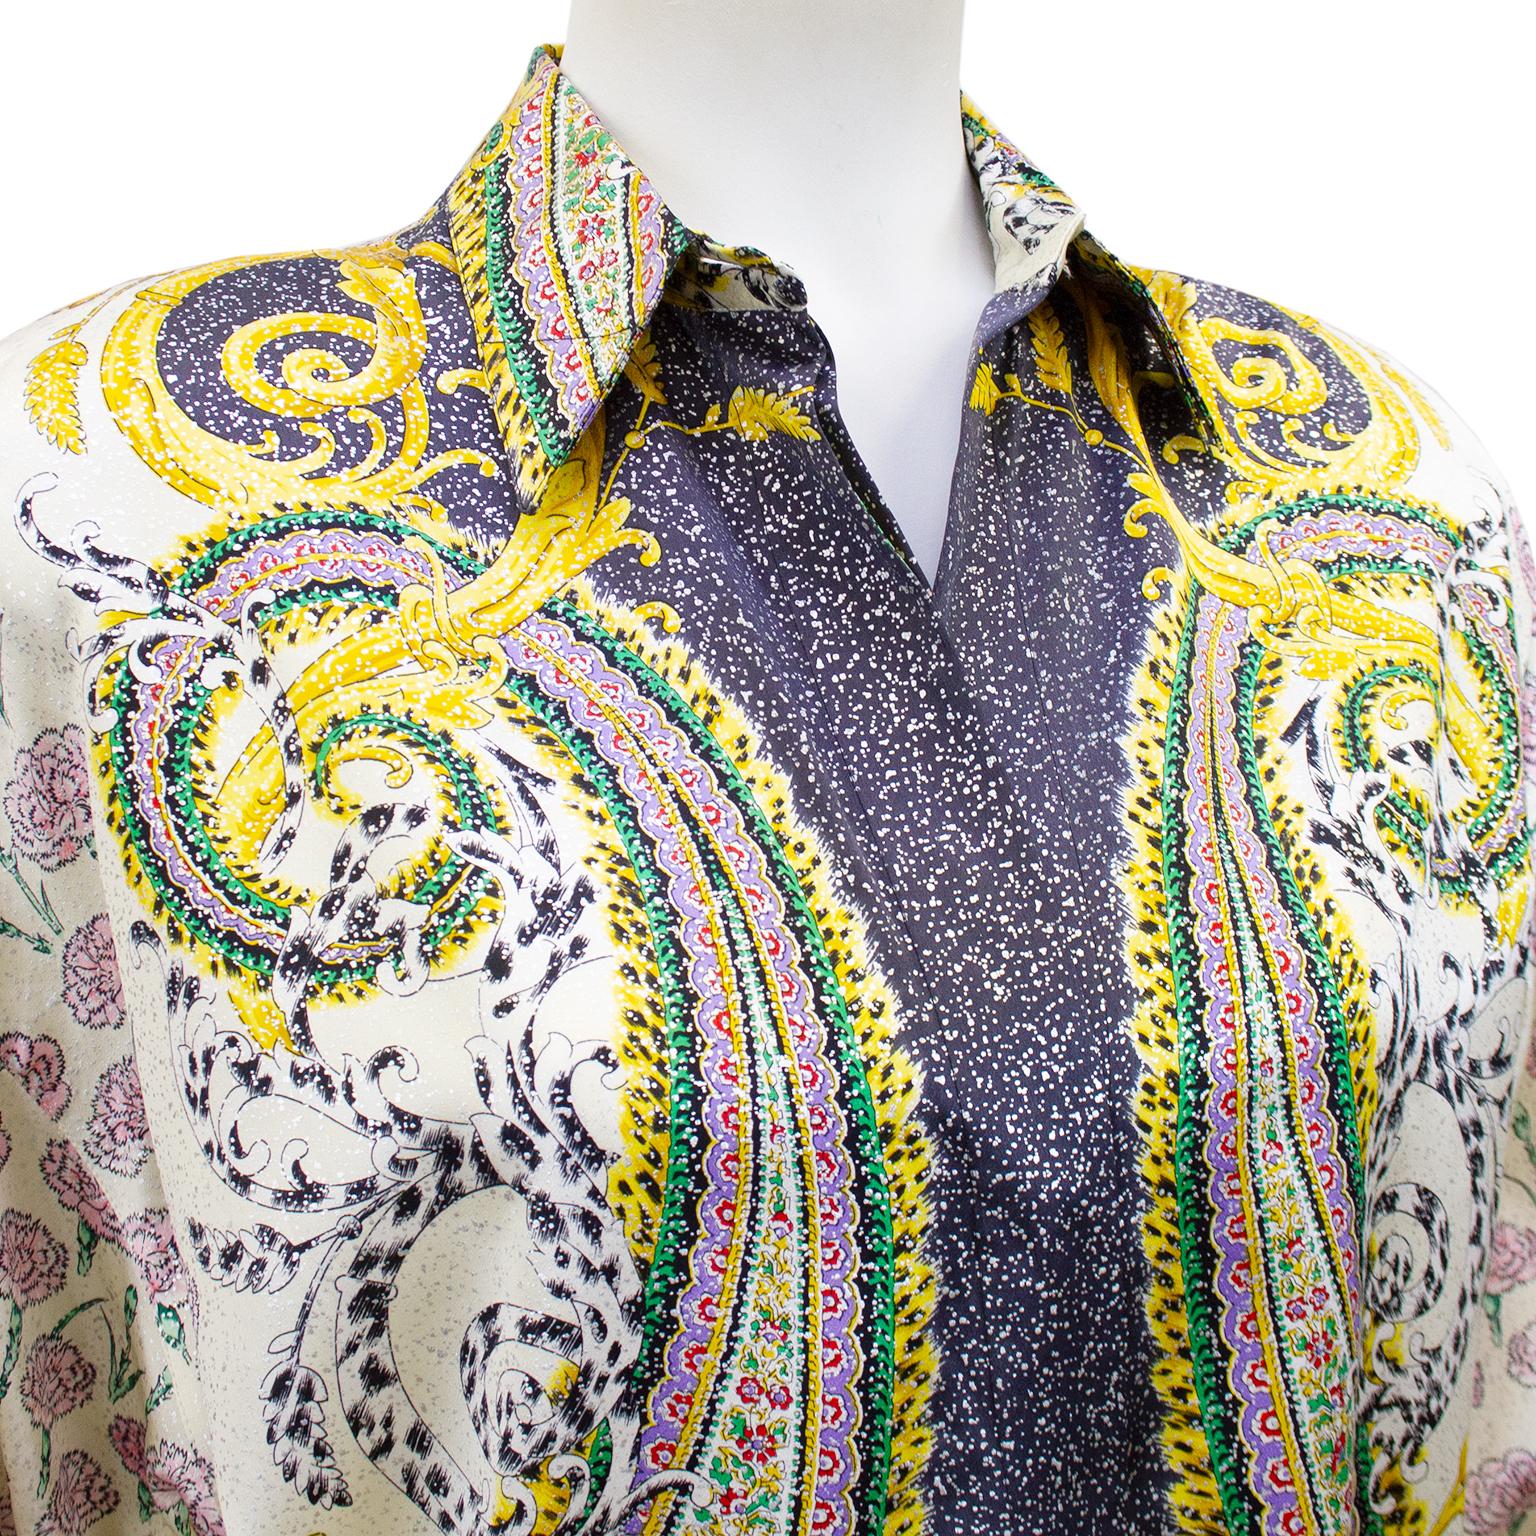 Women's or Men's 1990s Gianni Versace Couture Baroque and Carnation Print Silk Shirt  For Sale